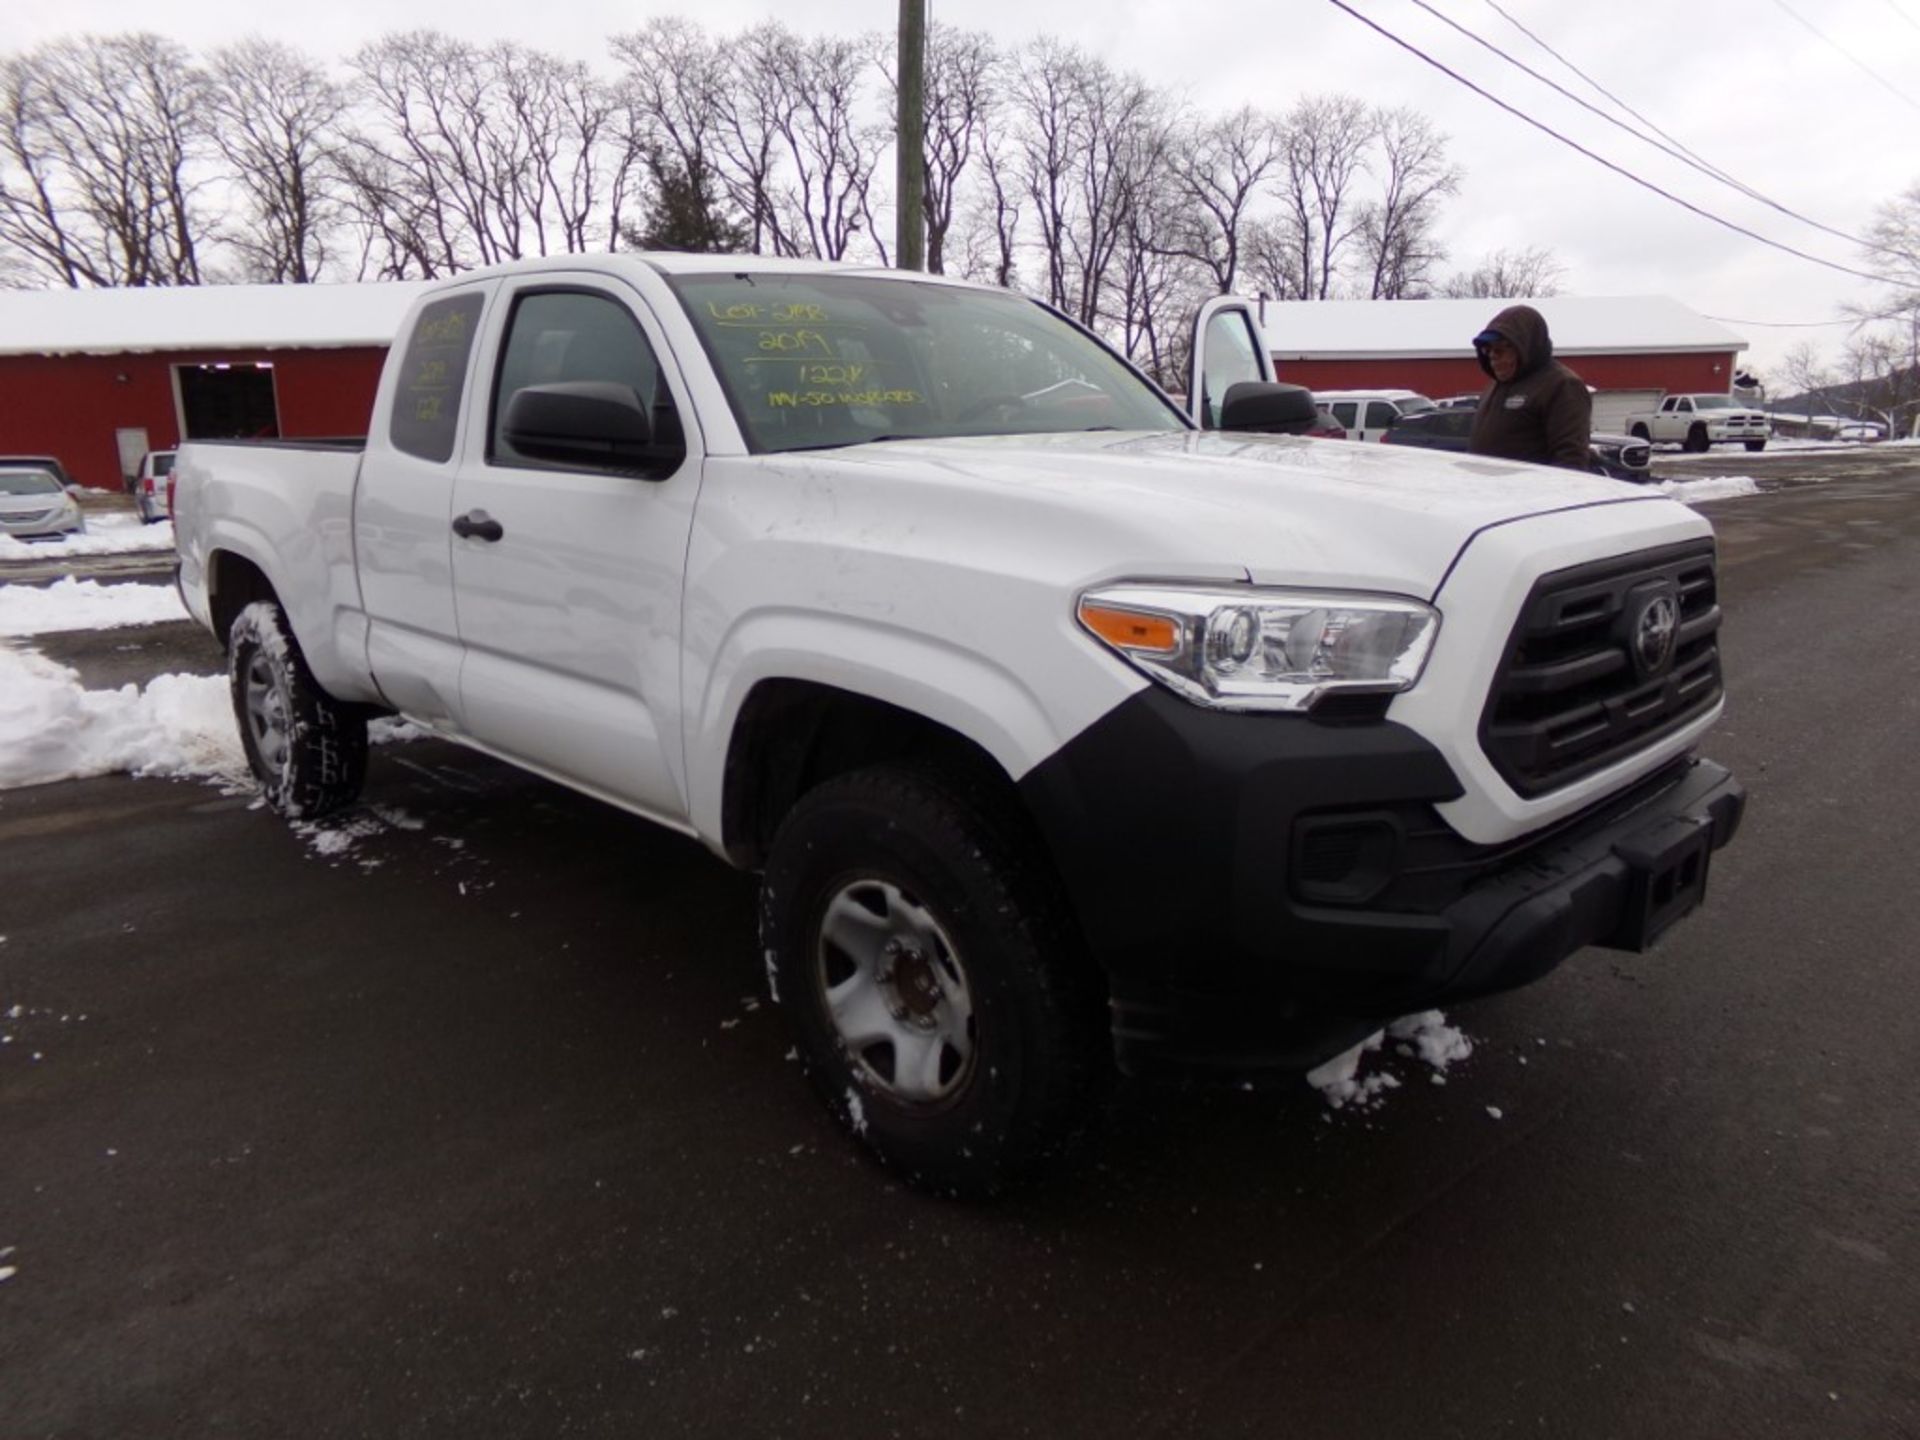 2019 Toyota Tacoma Ext Cab SR, 2wd, White, 122,834 Miles, VIN#5TFRX5GN8KX147601, GAS TANK DOOR IS - Image 4 of 7